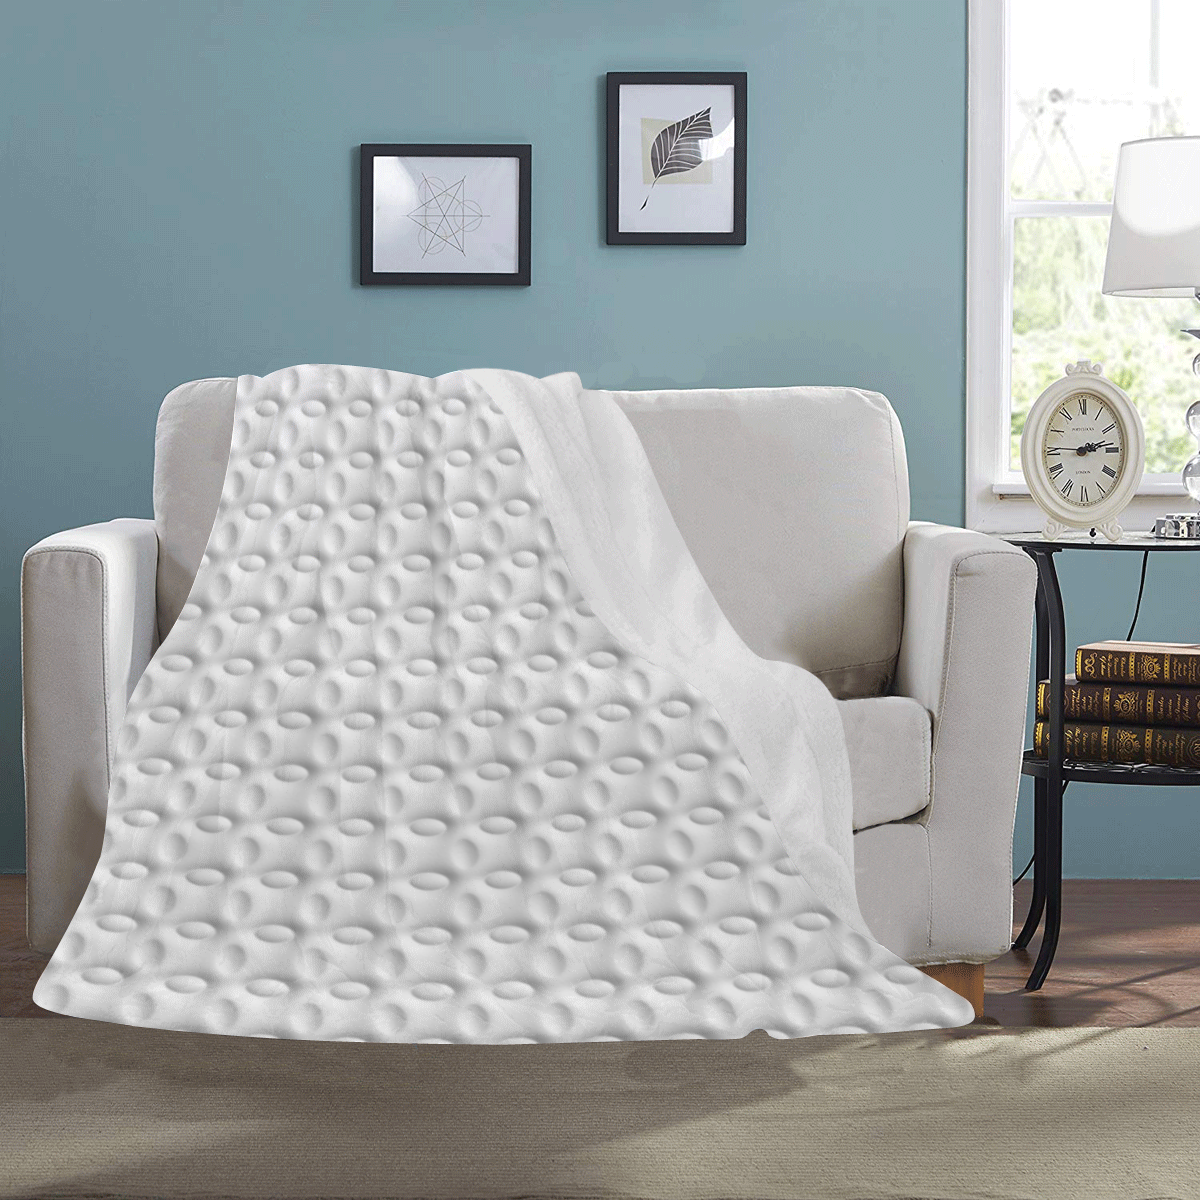 White ellipses embossed abstract Ultra-Soft Micro Fleece Blanket 43''x56''